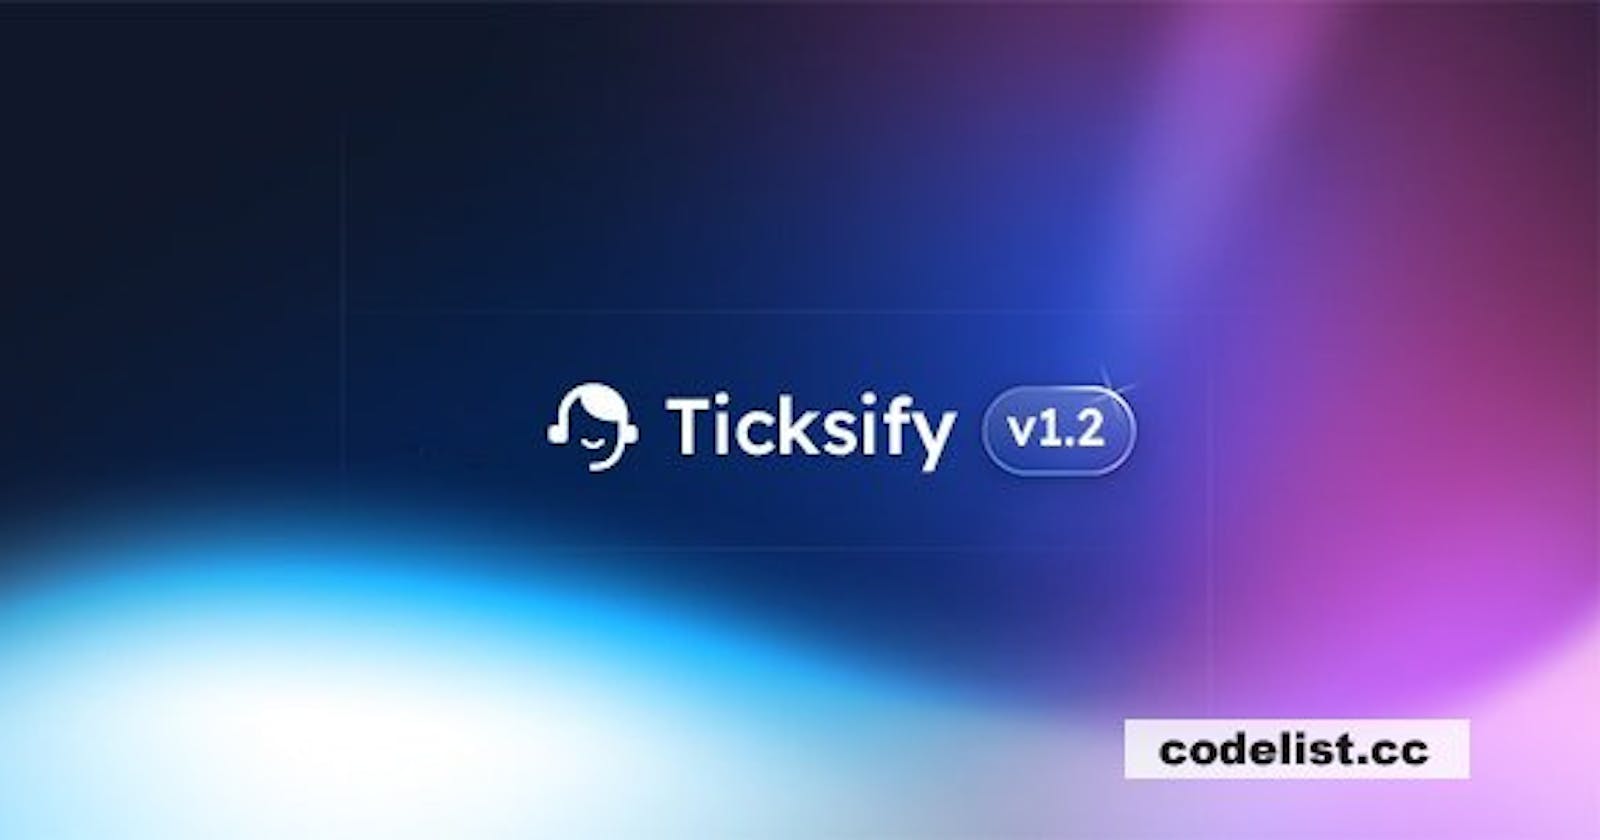 Ticksify v1.2.2 - Customer Support Software for Freelancers and SMBs